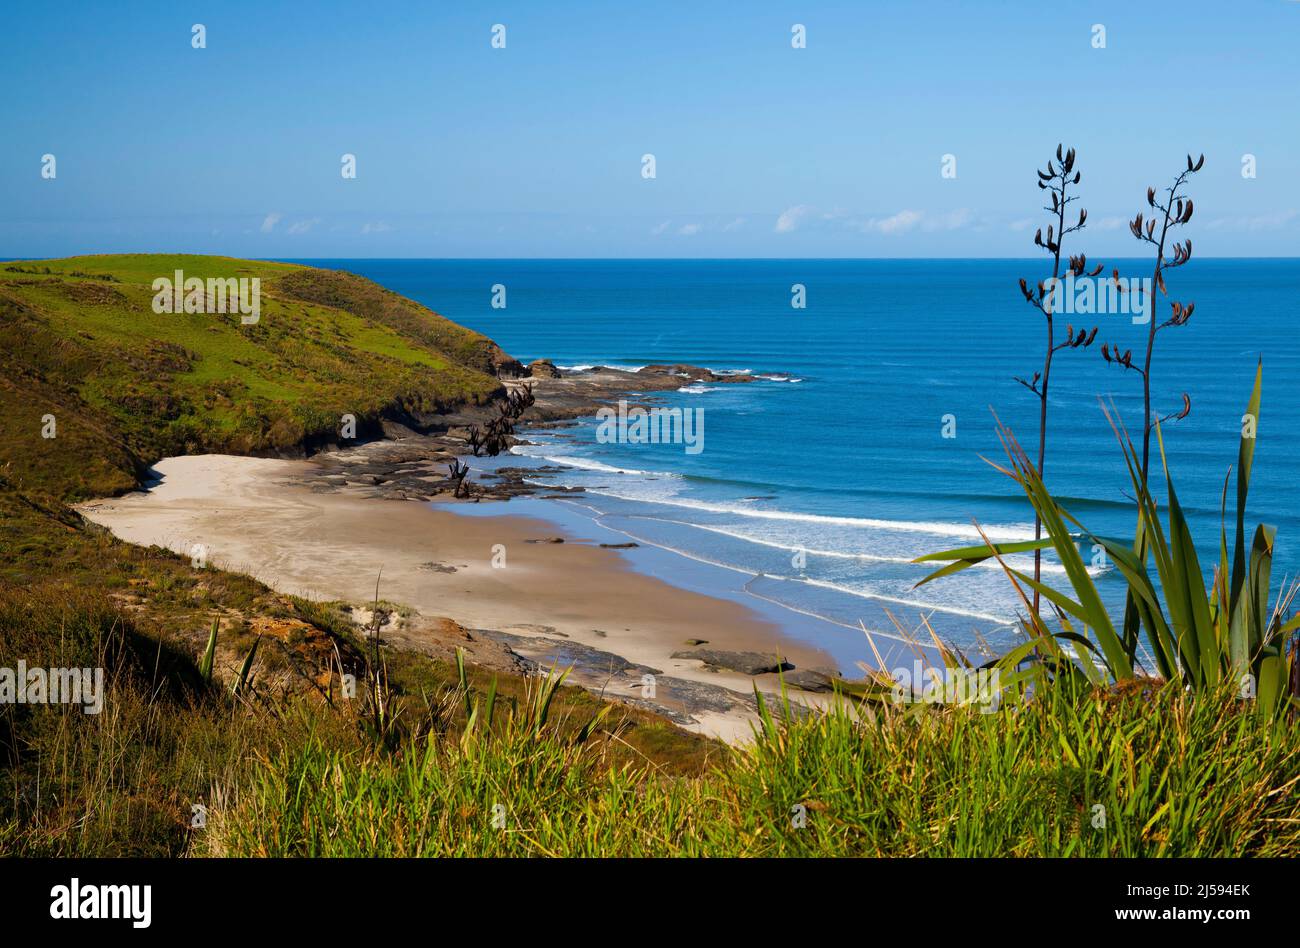 View of the Tasman Sea on the North Island of New Zealand Stock Photo